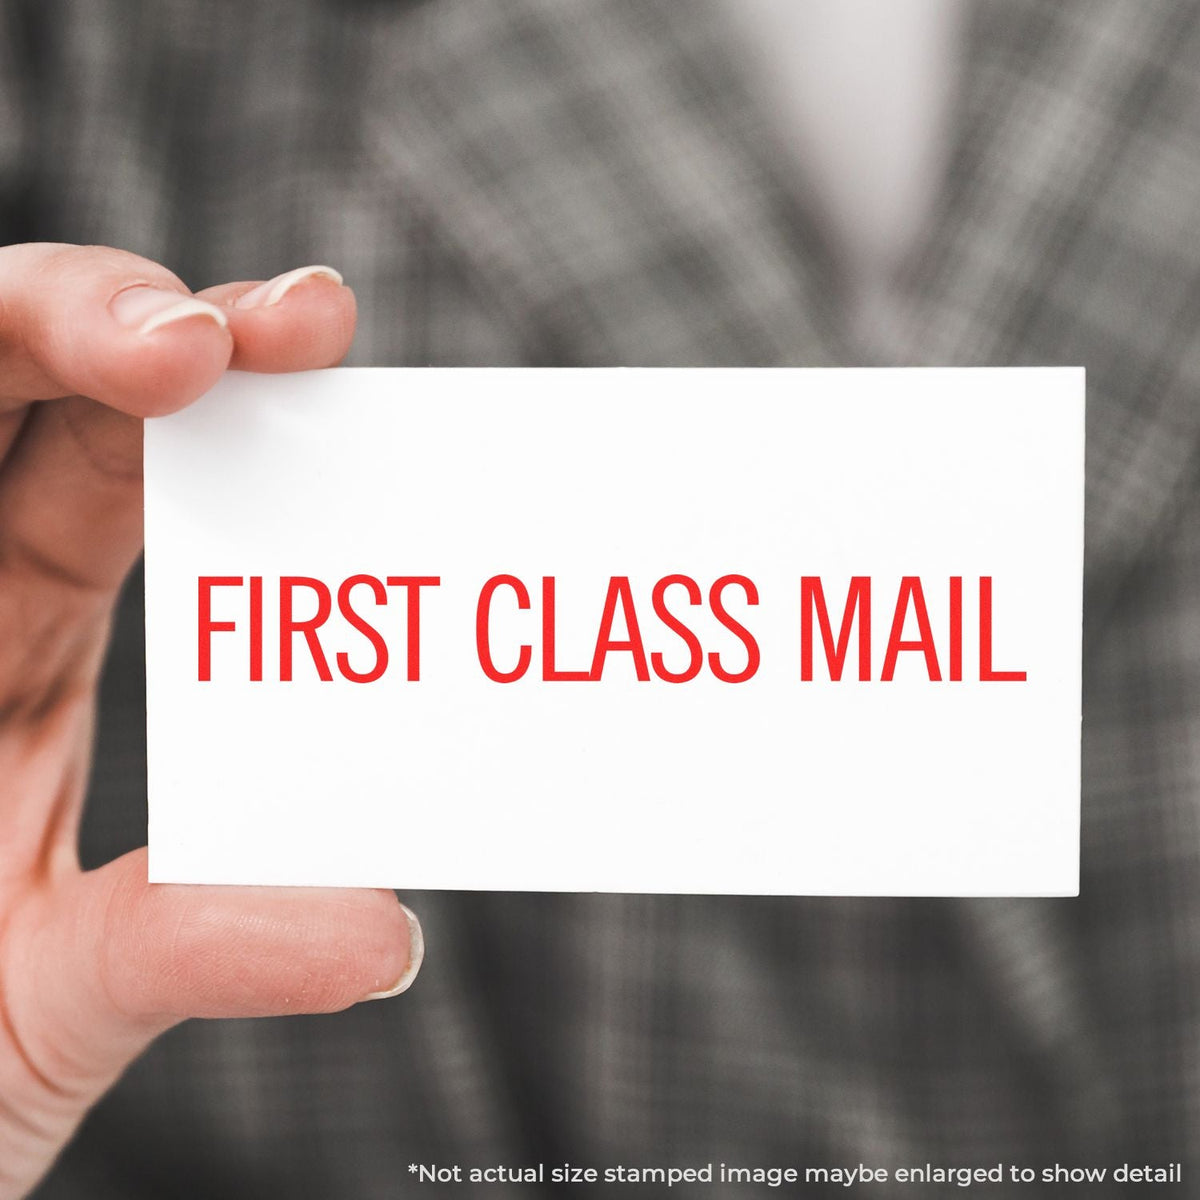 In Use Self-Inking Narrow First Class Mail Stamp Image